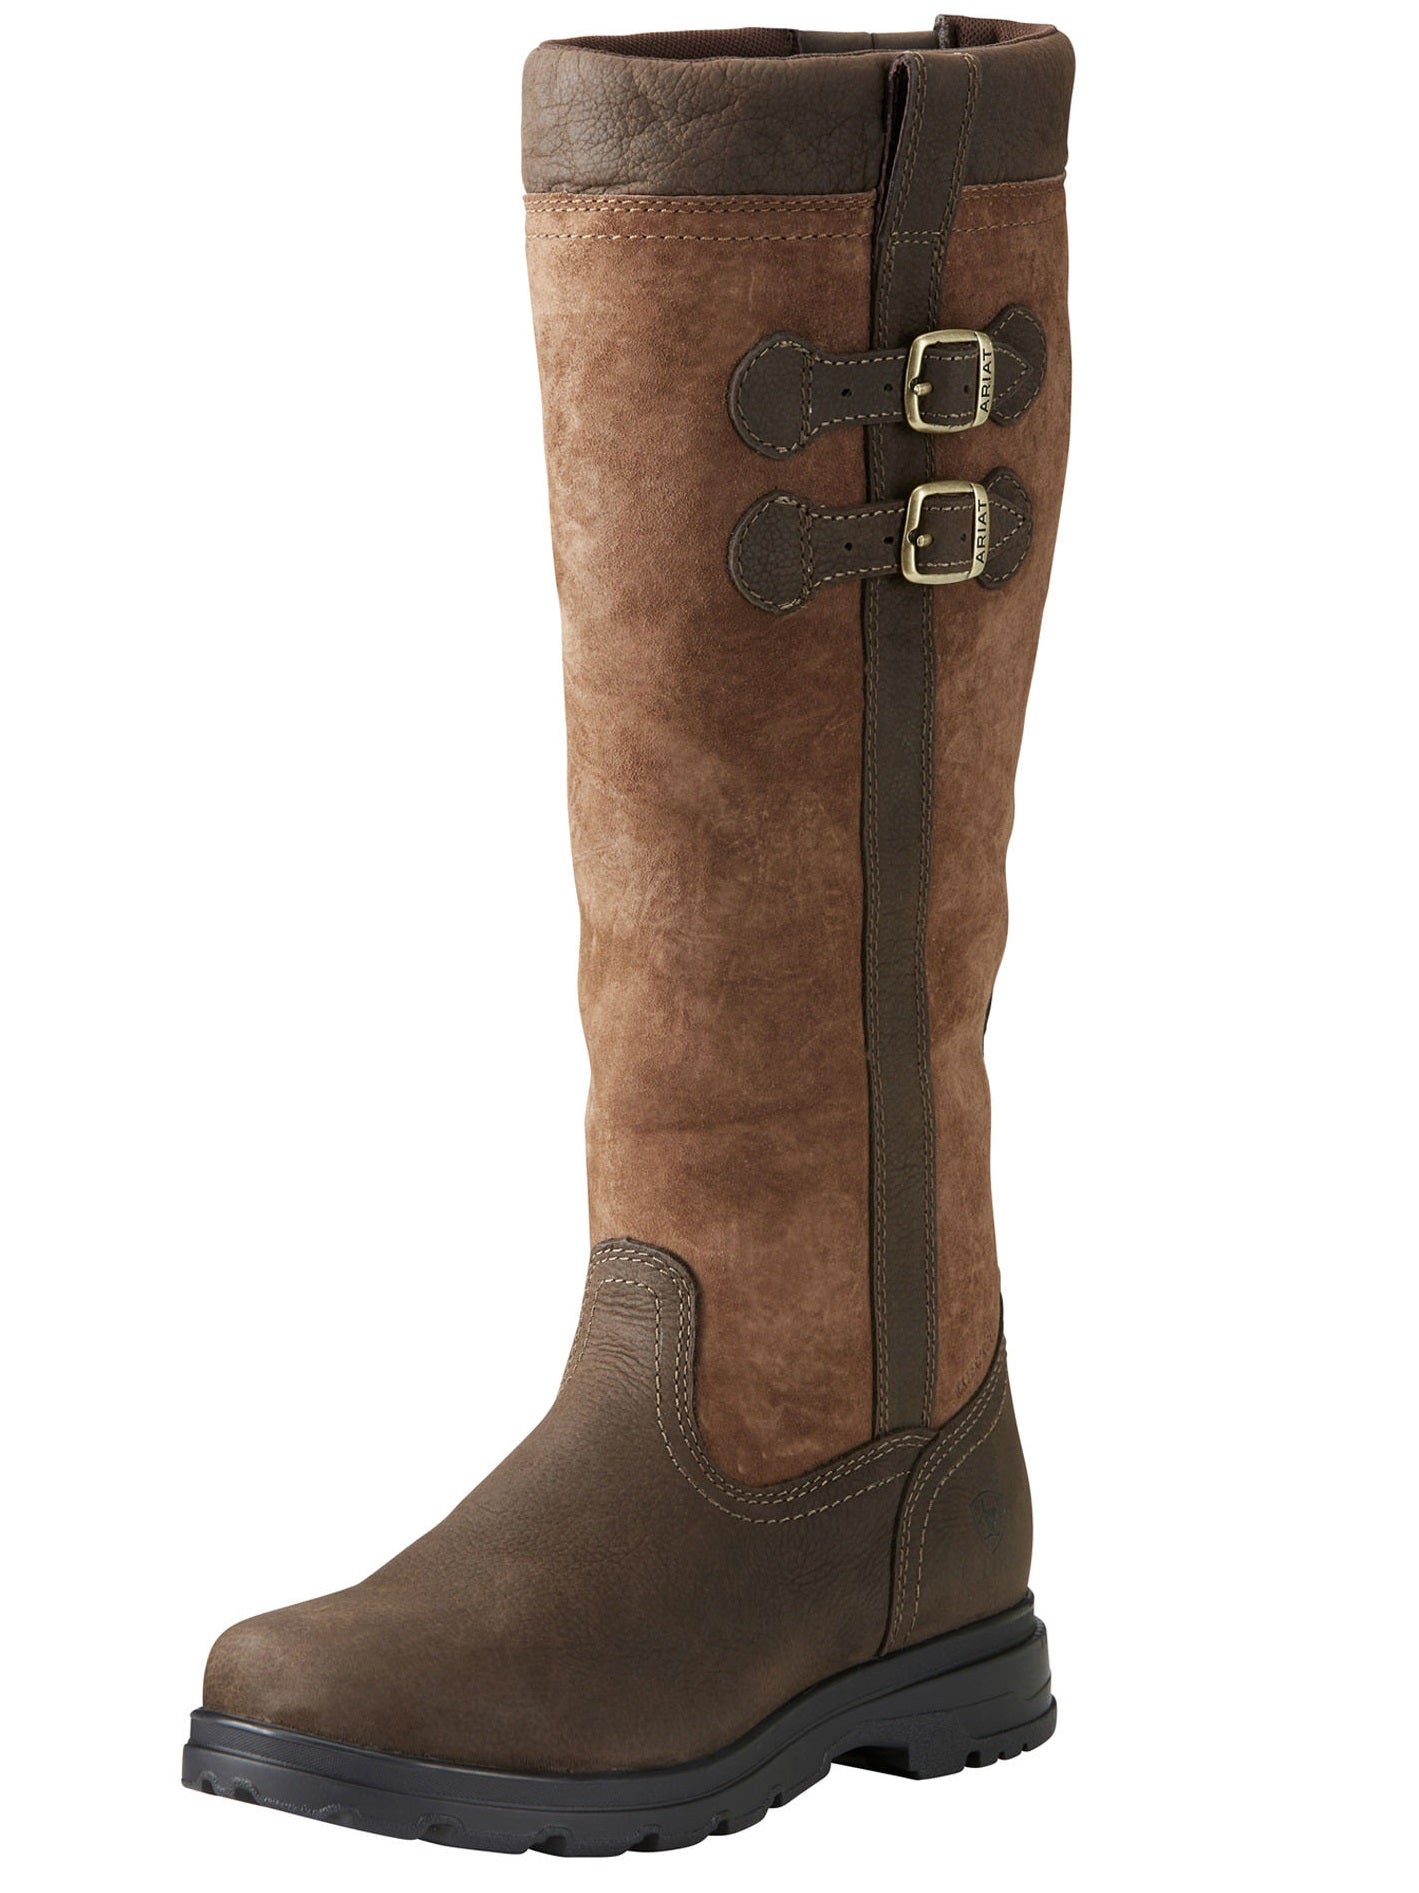 Ariat Boots - Womens Eskdale H2O - Java